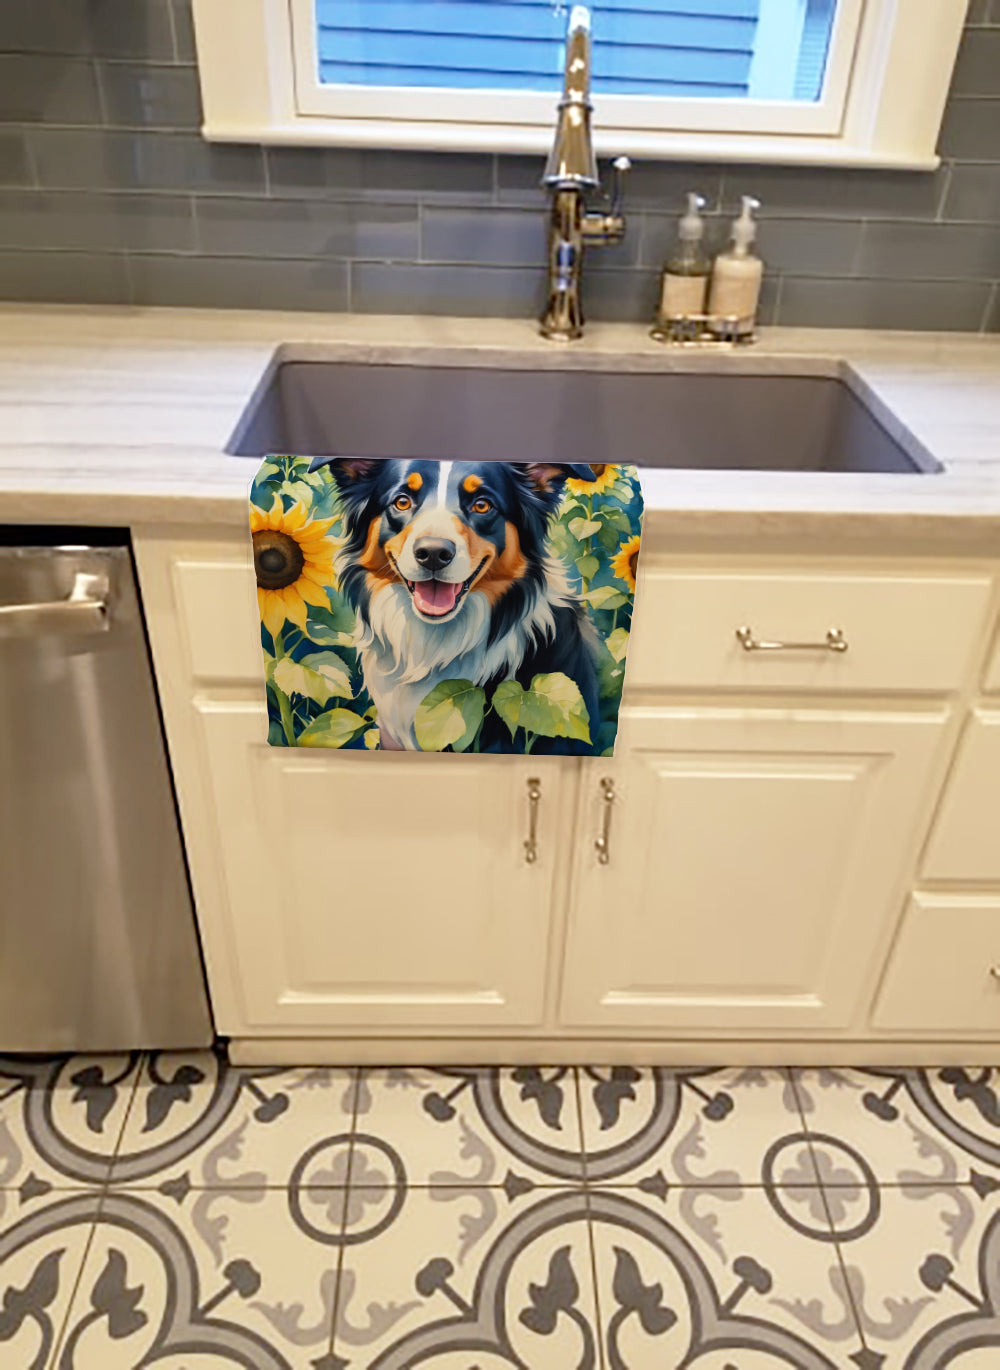 Buy this Border Collie in Sunflowers Kitchen Towel